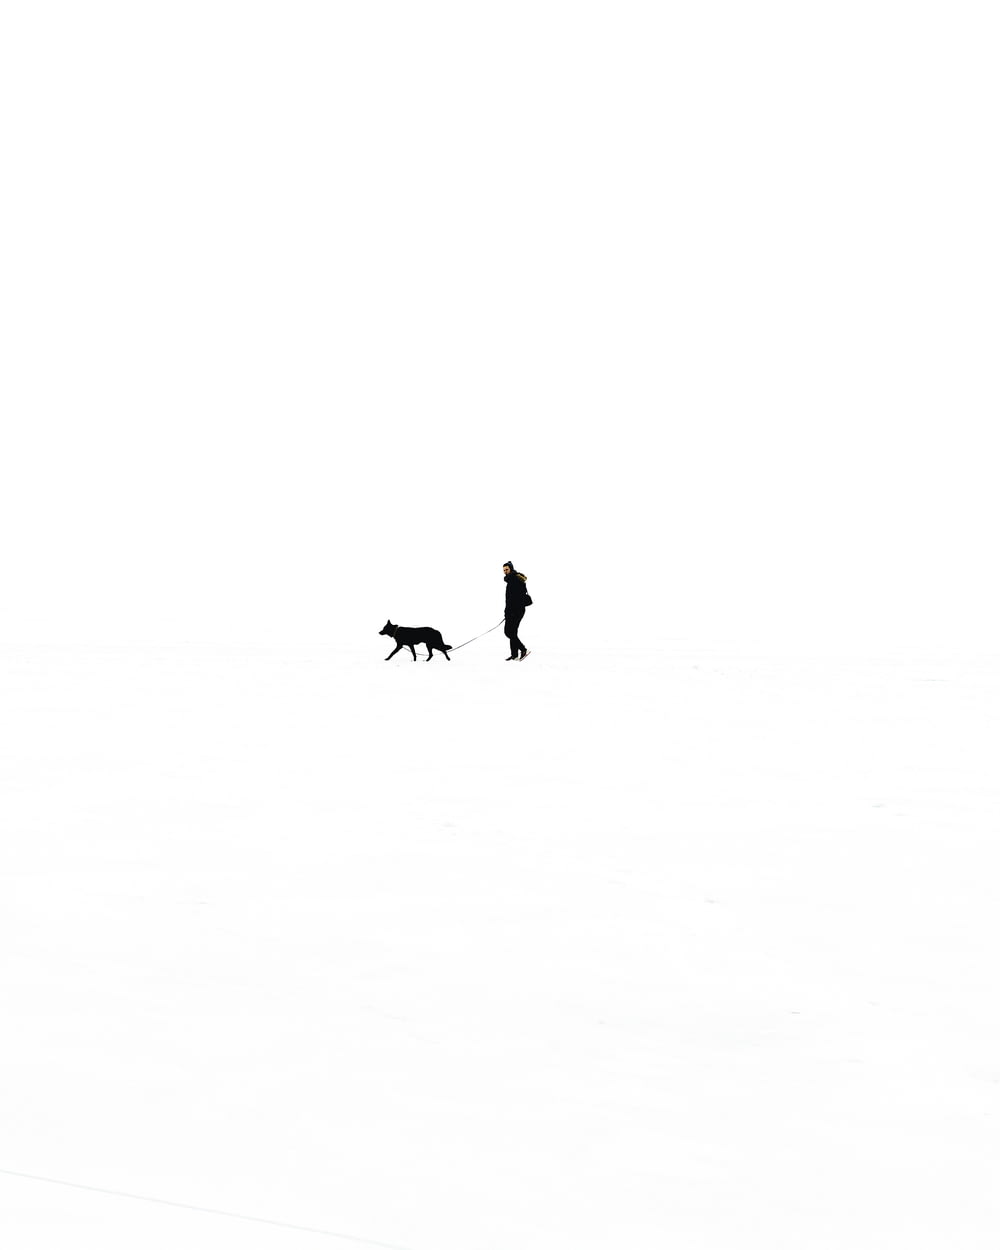 person walking with dog against black background